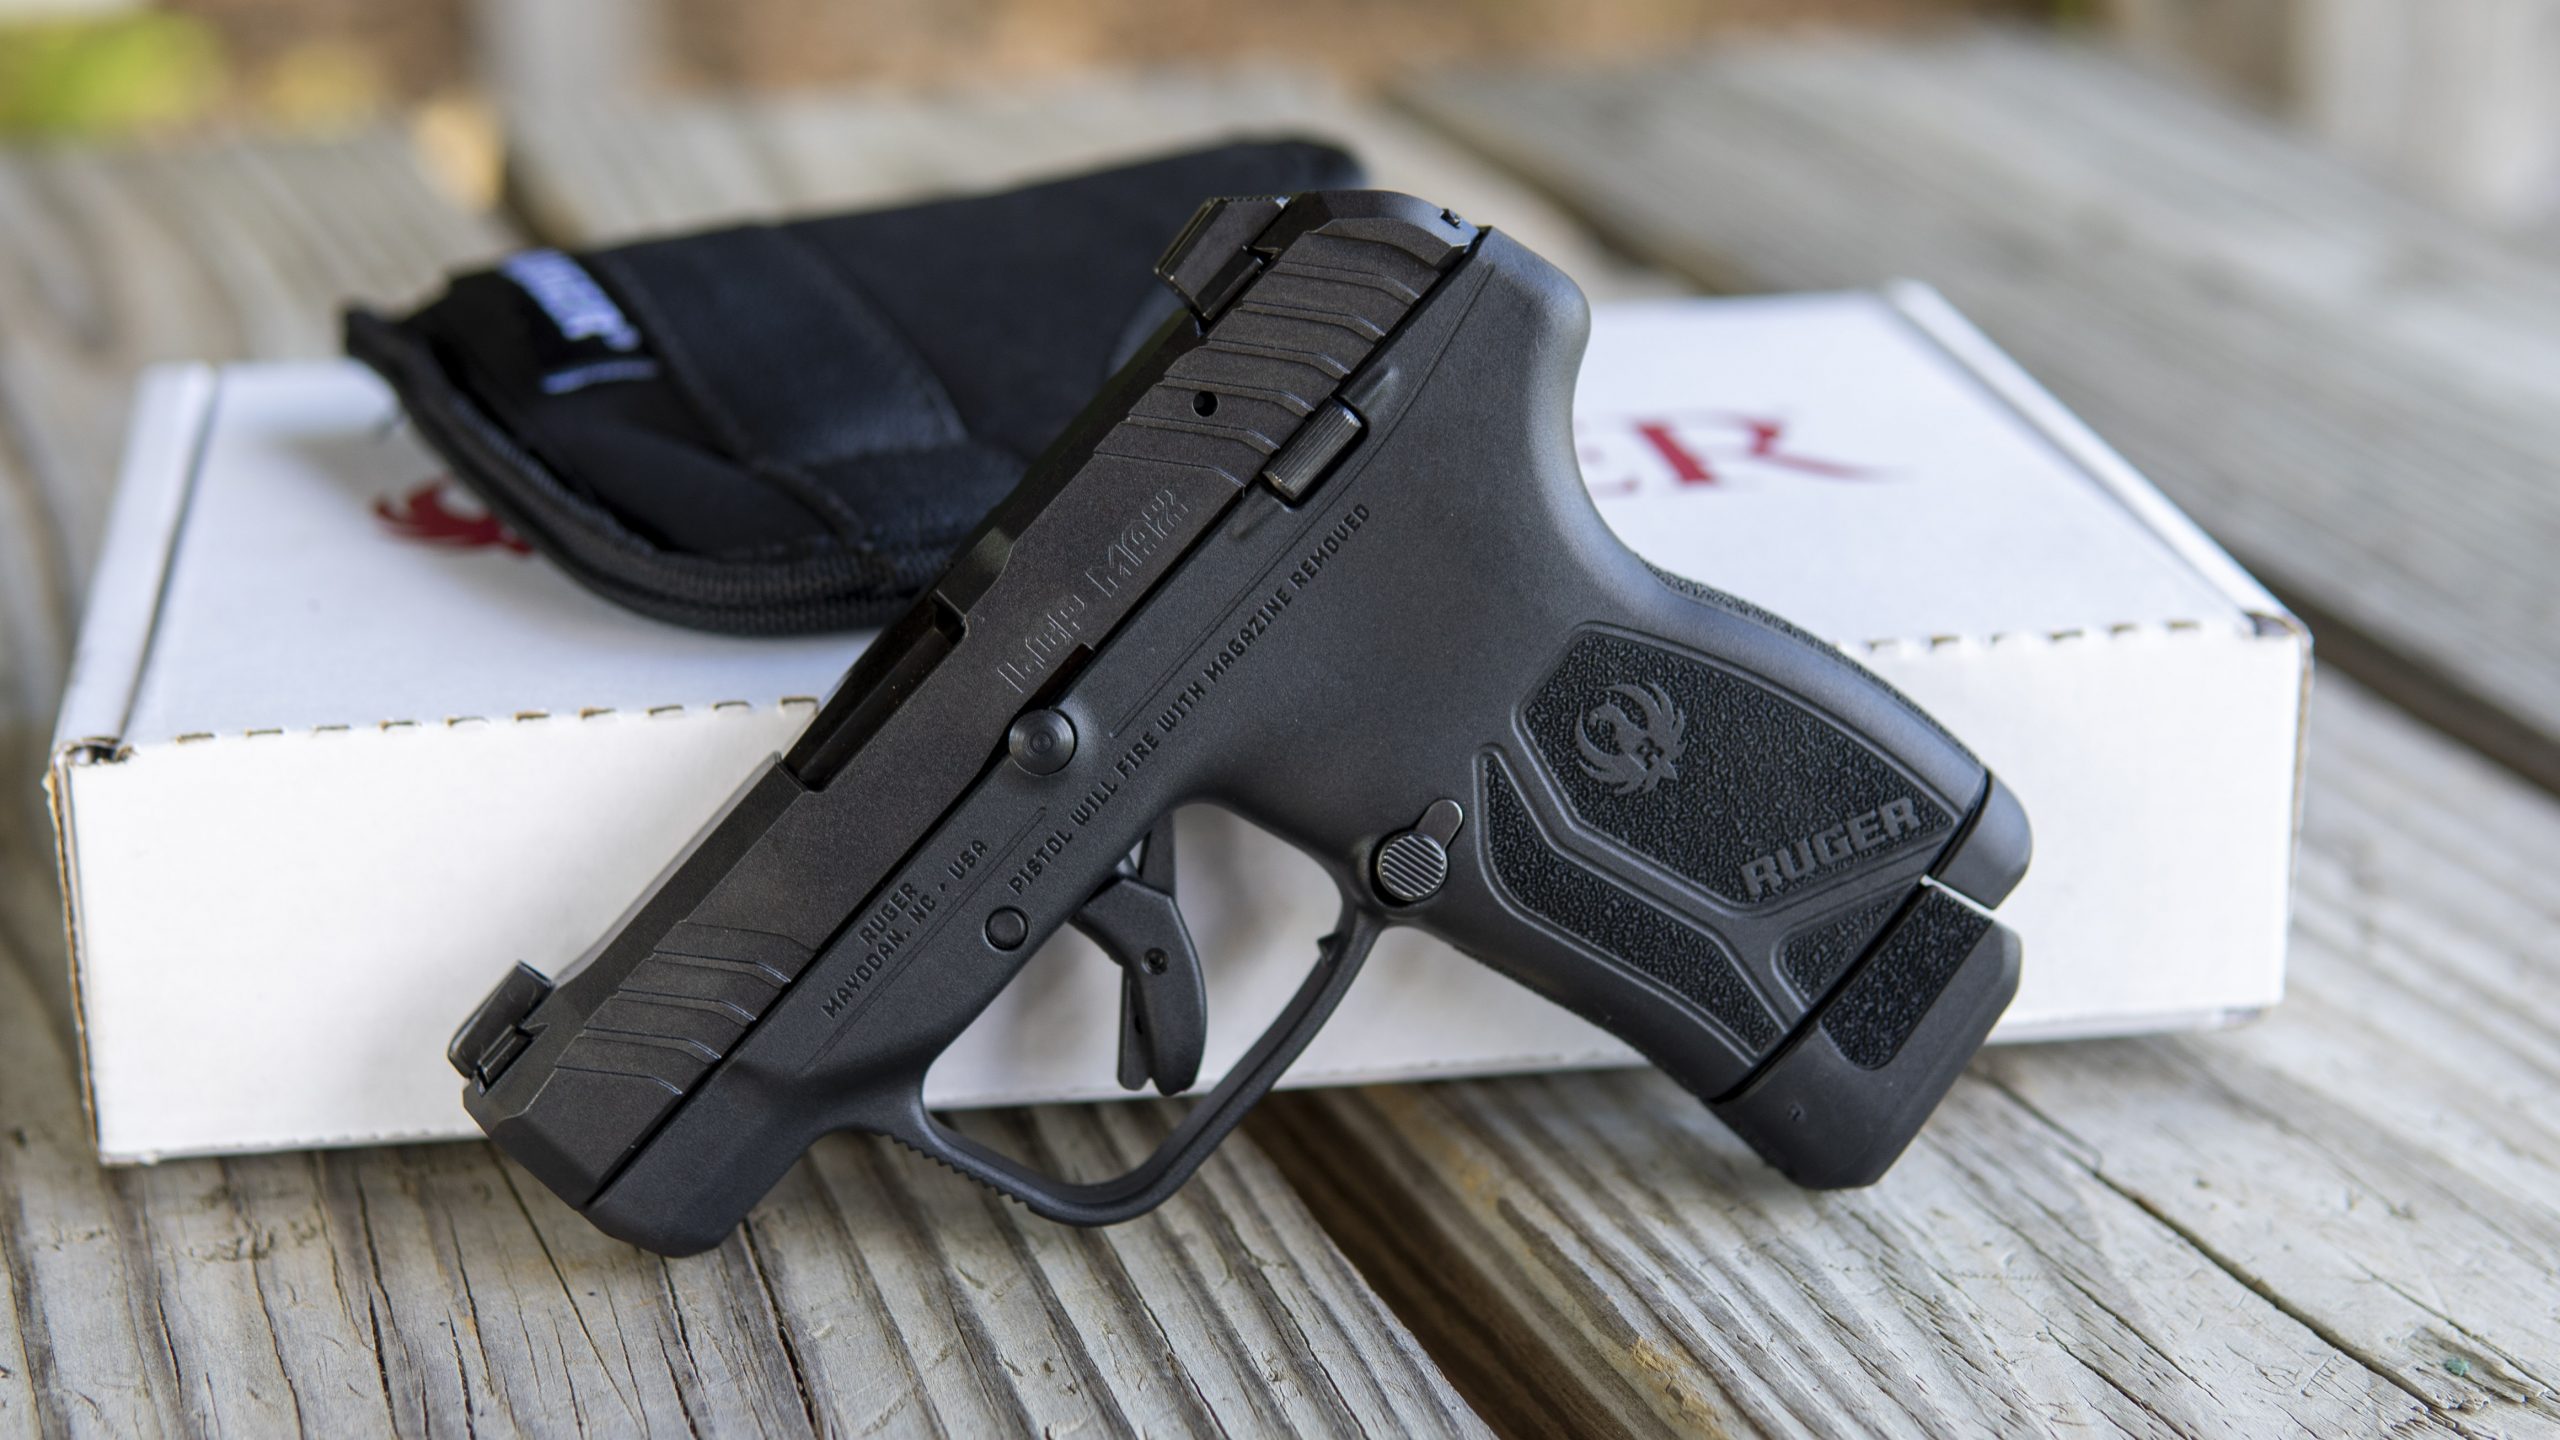 Ruger lcp 2 vs glock 42